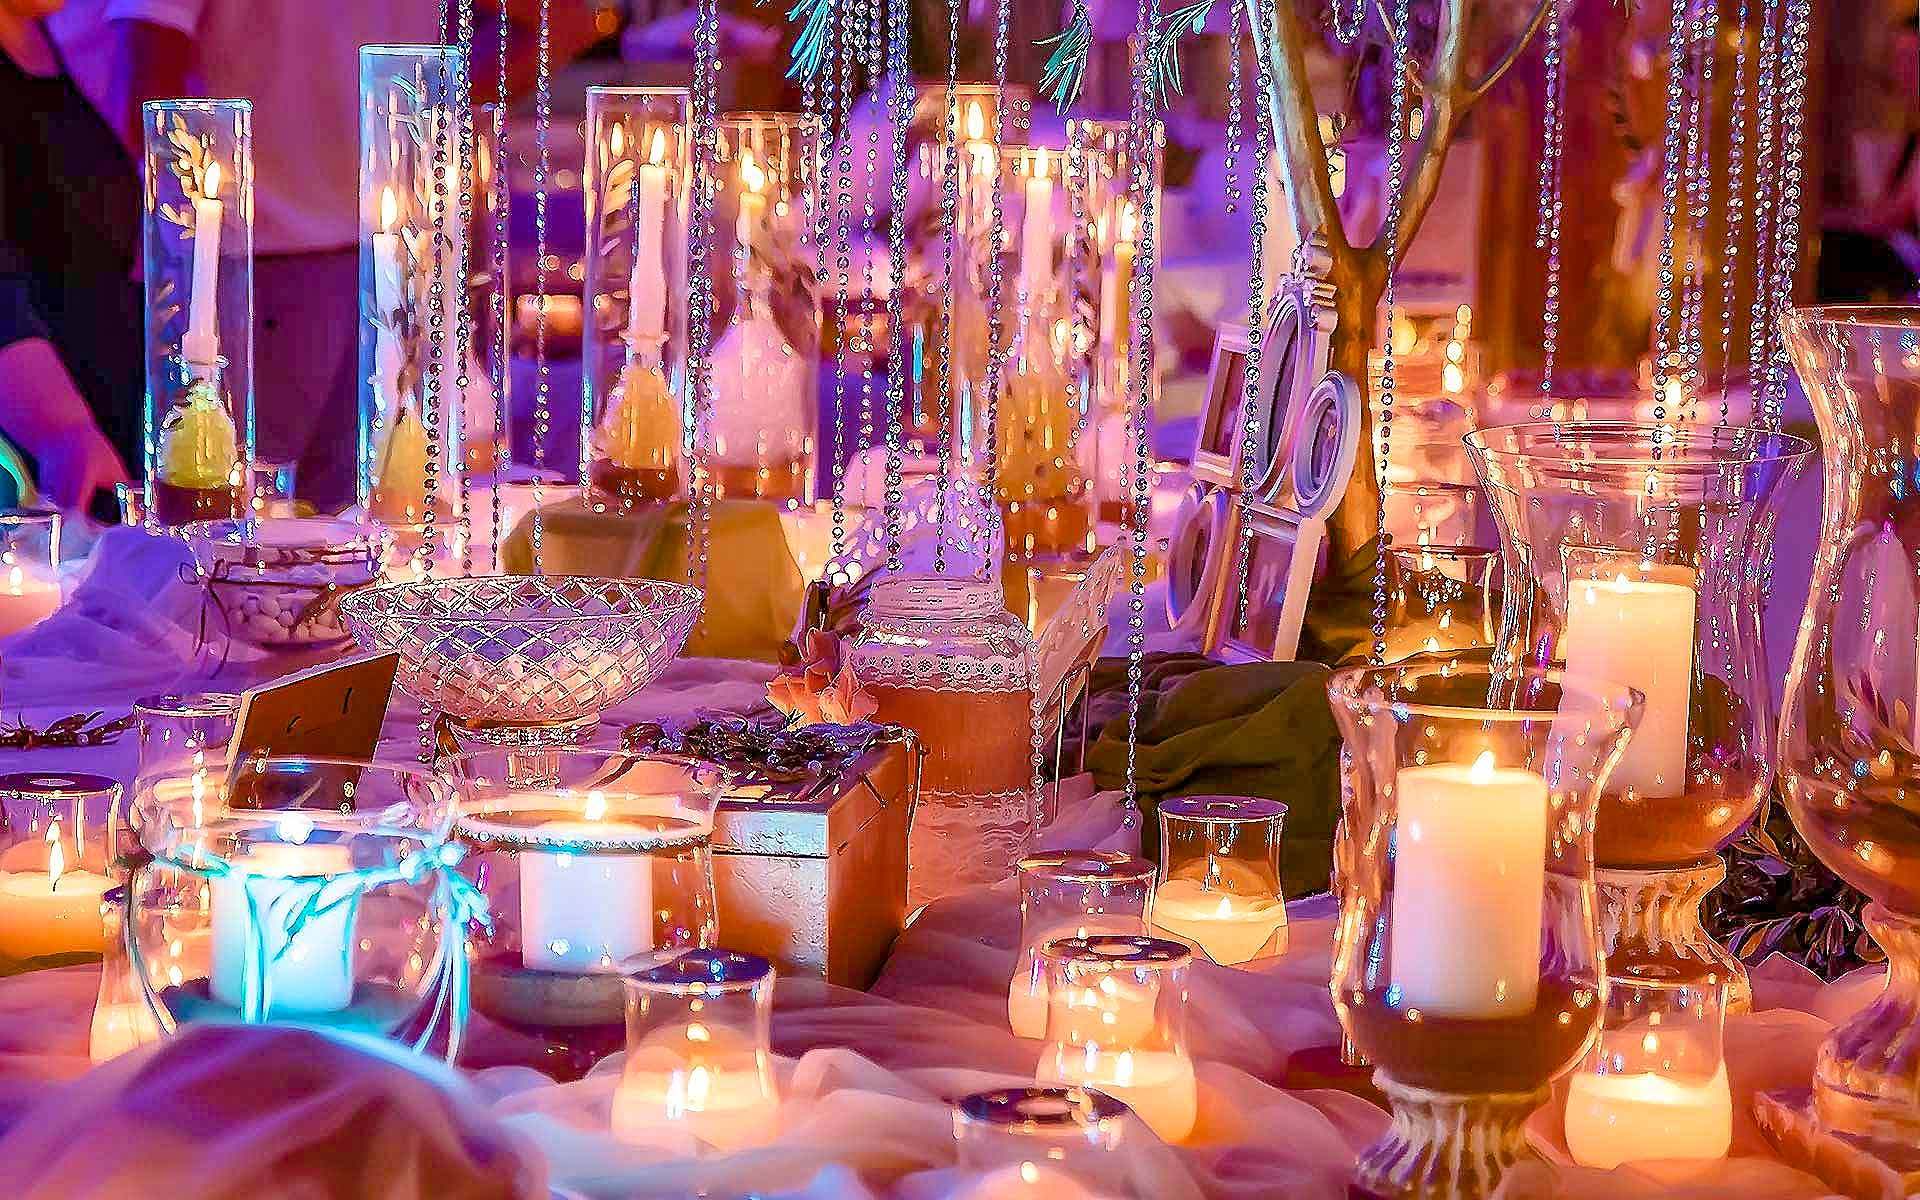 Lighting-With-Candles-And-Vases-For-A-Romantic-Wedding-Decoration